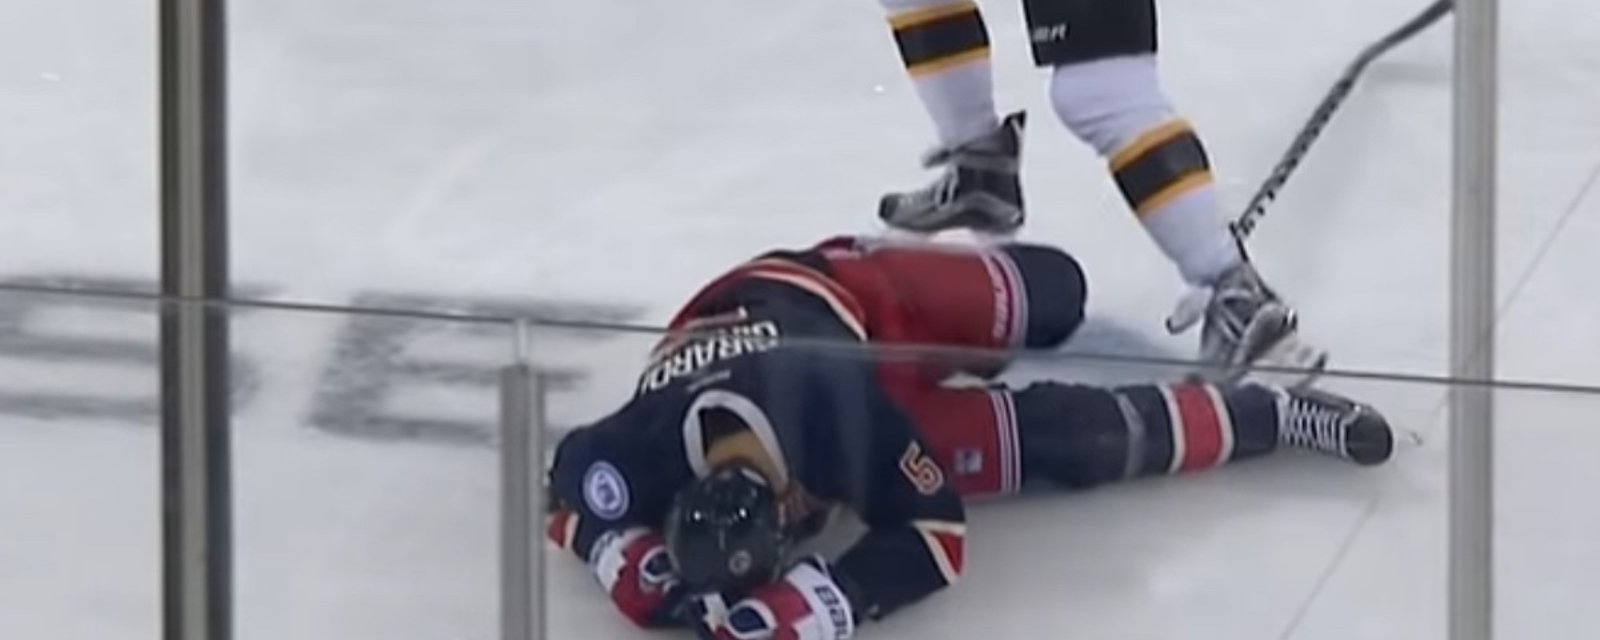 NHL Player Safety announces hearing after this crushing hit on Girardi.